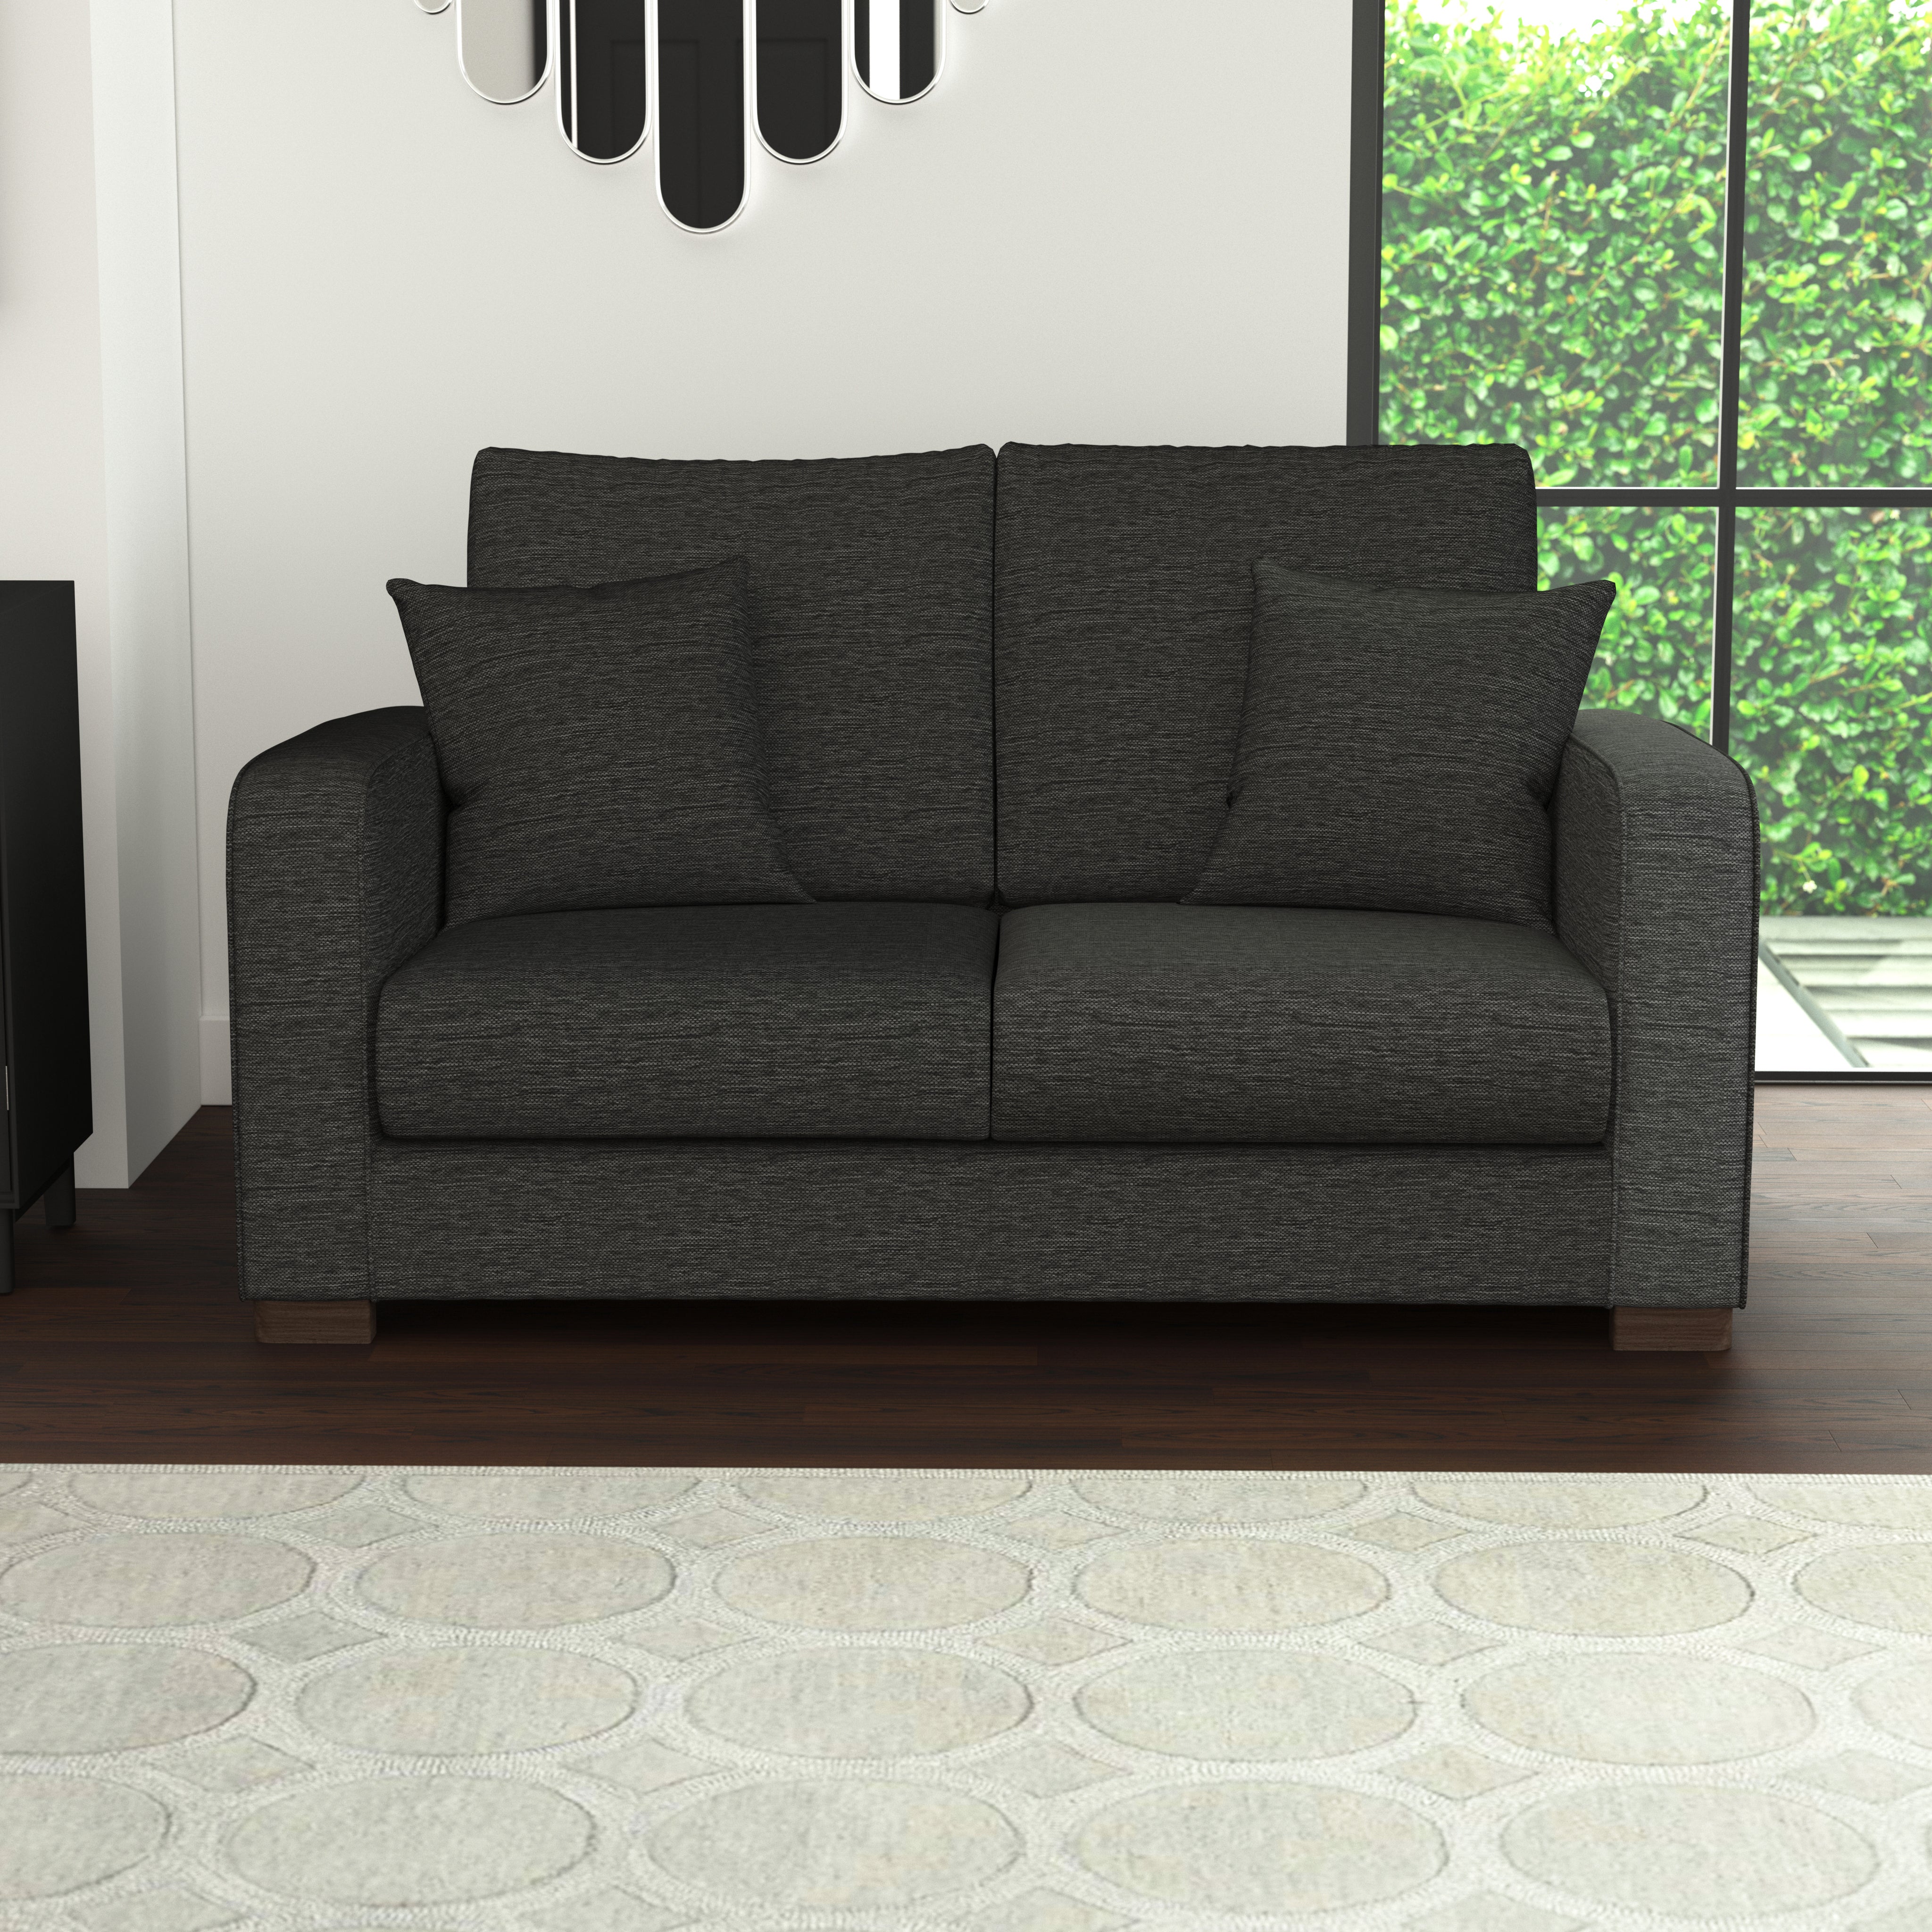 Carson Deep Sit Vivalife Stain-Resistant Fabric 2 Seater Sofa